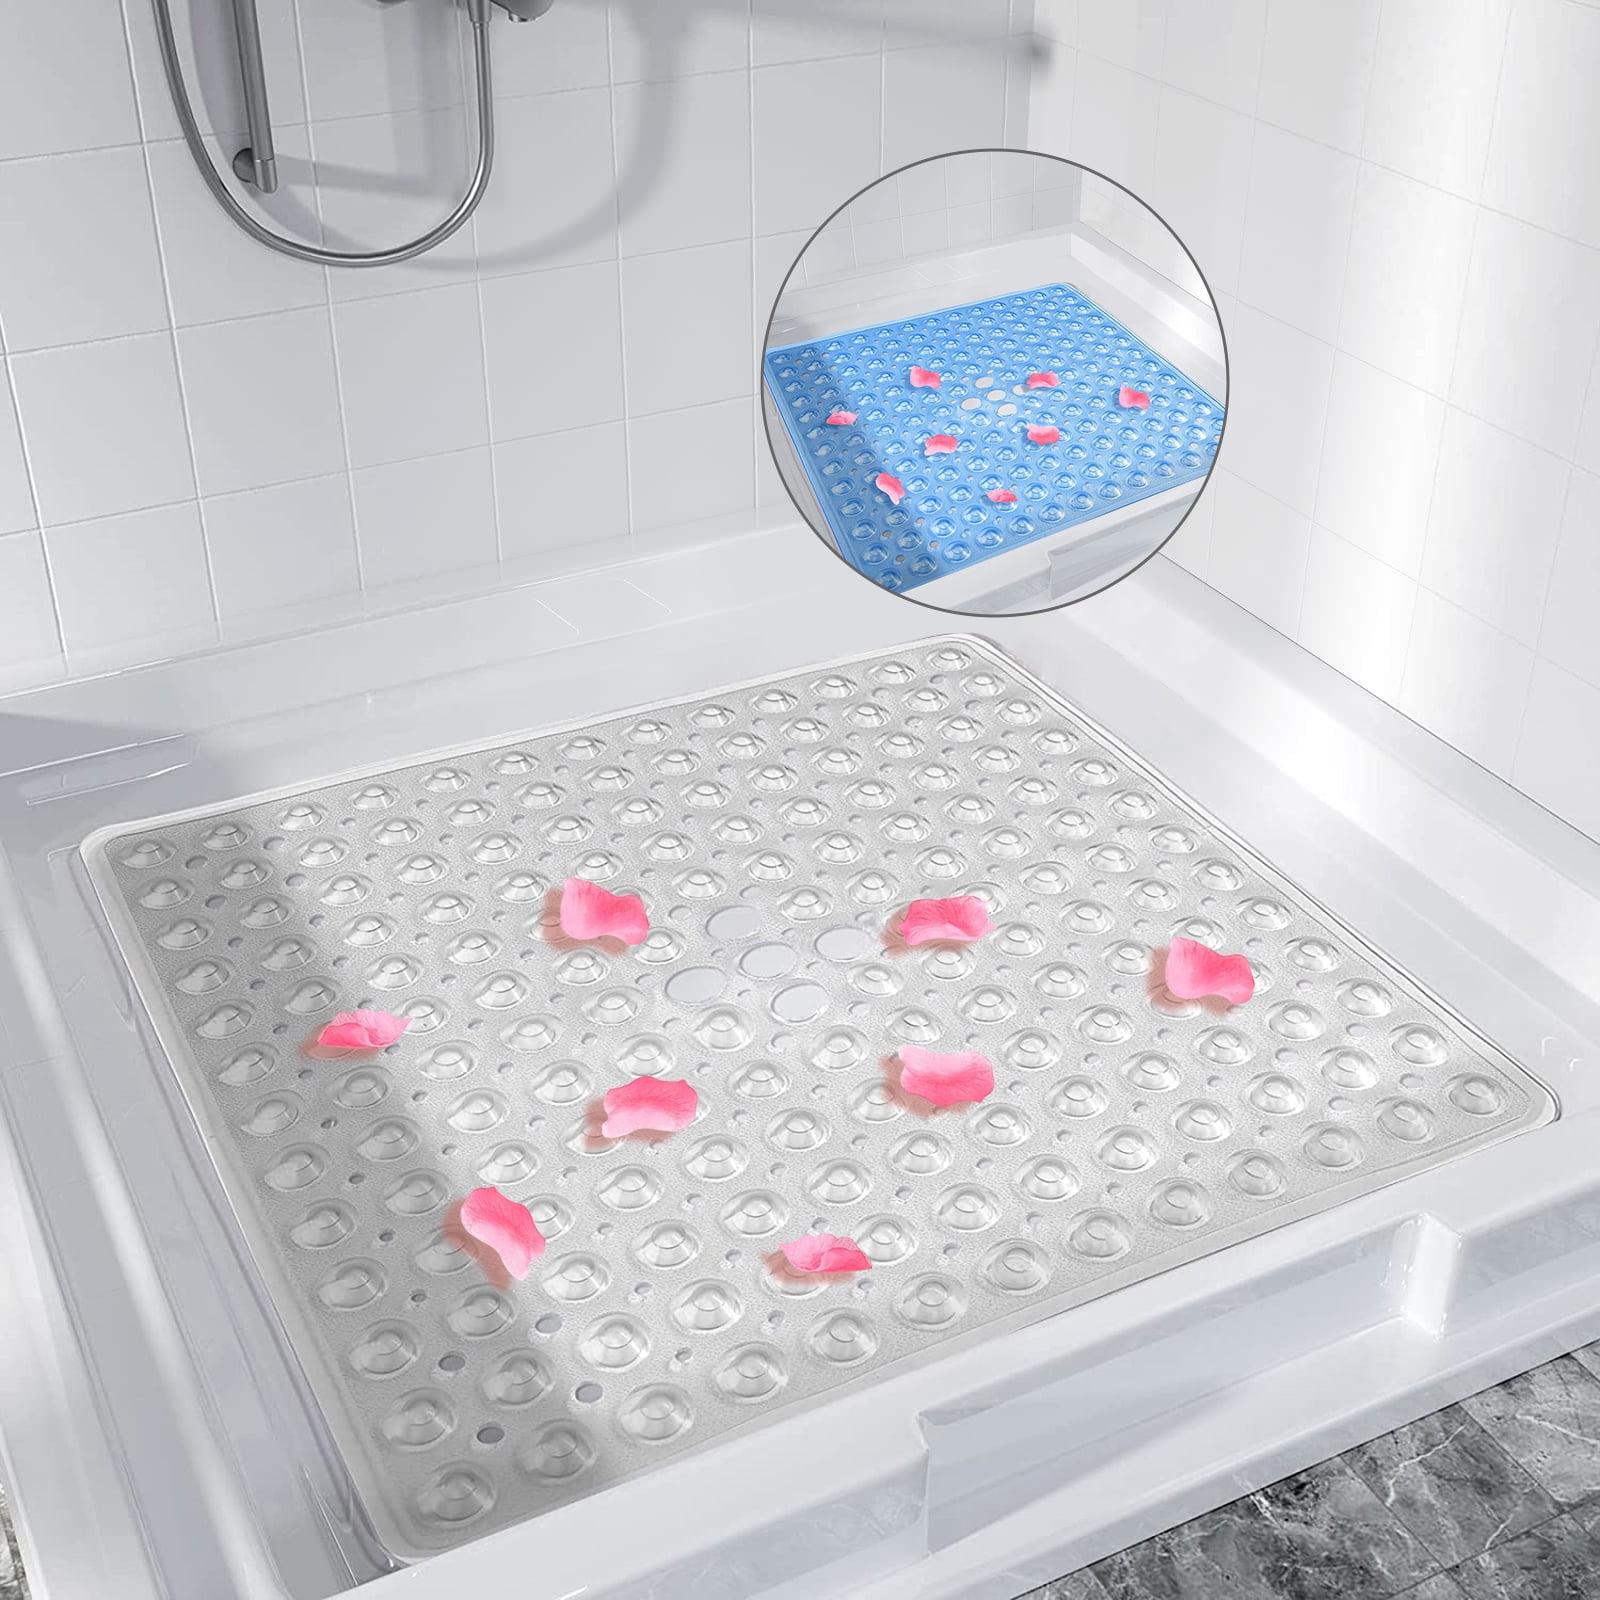 Long Bathtub Mat Tpe Door Mat Bathroom Anti-slip Mat With Suction Cups And  Drainage Holes For Non-slip And Anti-fall